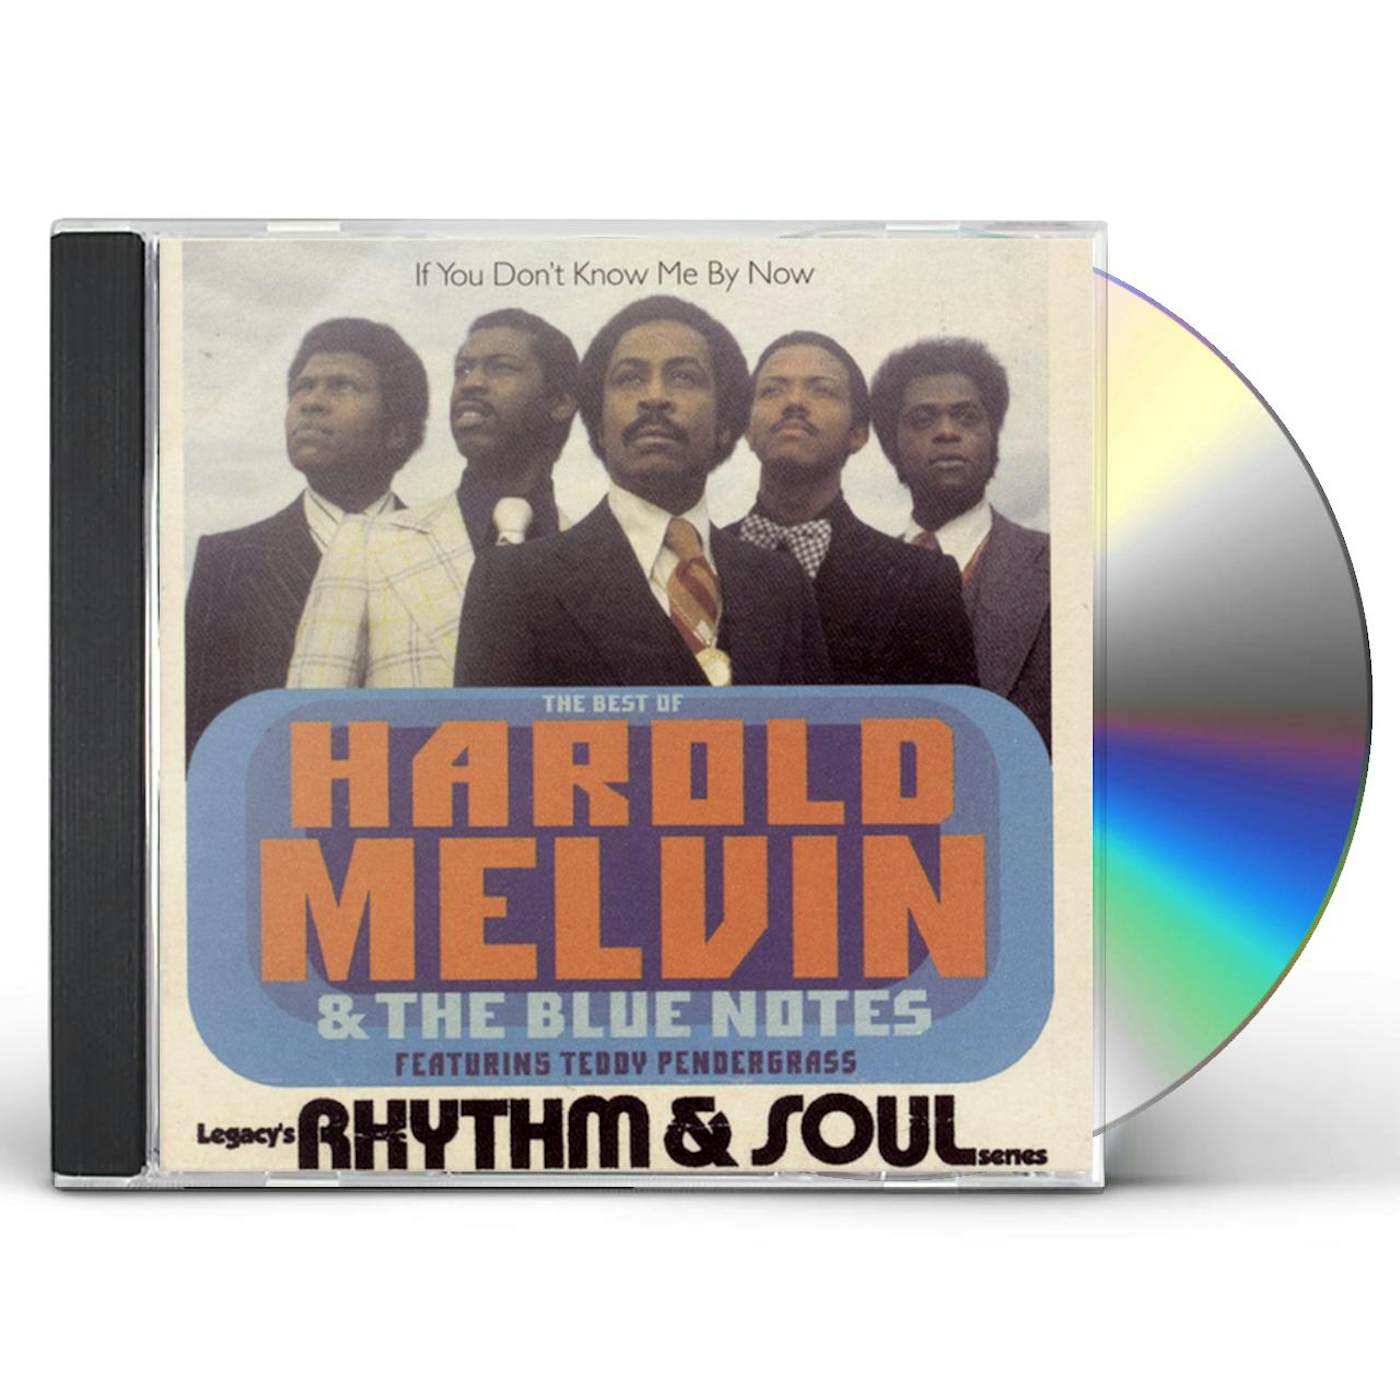 Harold Melvin & The Blue Notes IF YOU DON'T KNOW ME BY NOW: BEST OF CD